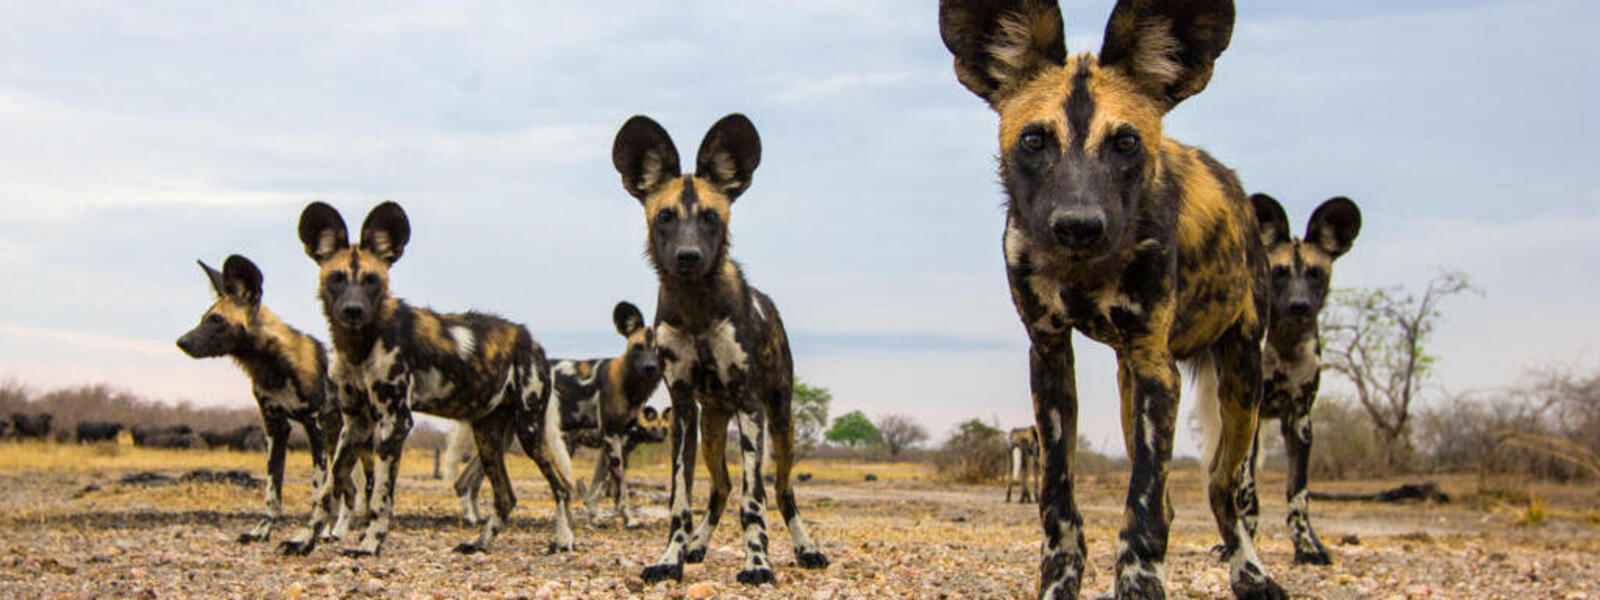 African wild dogs in Zamibia